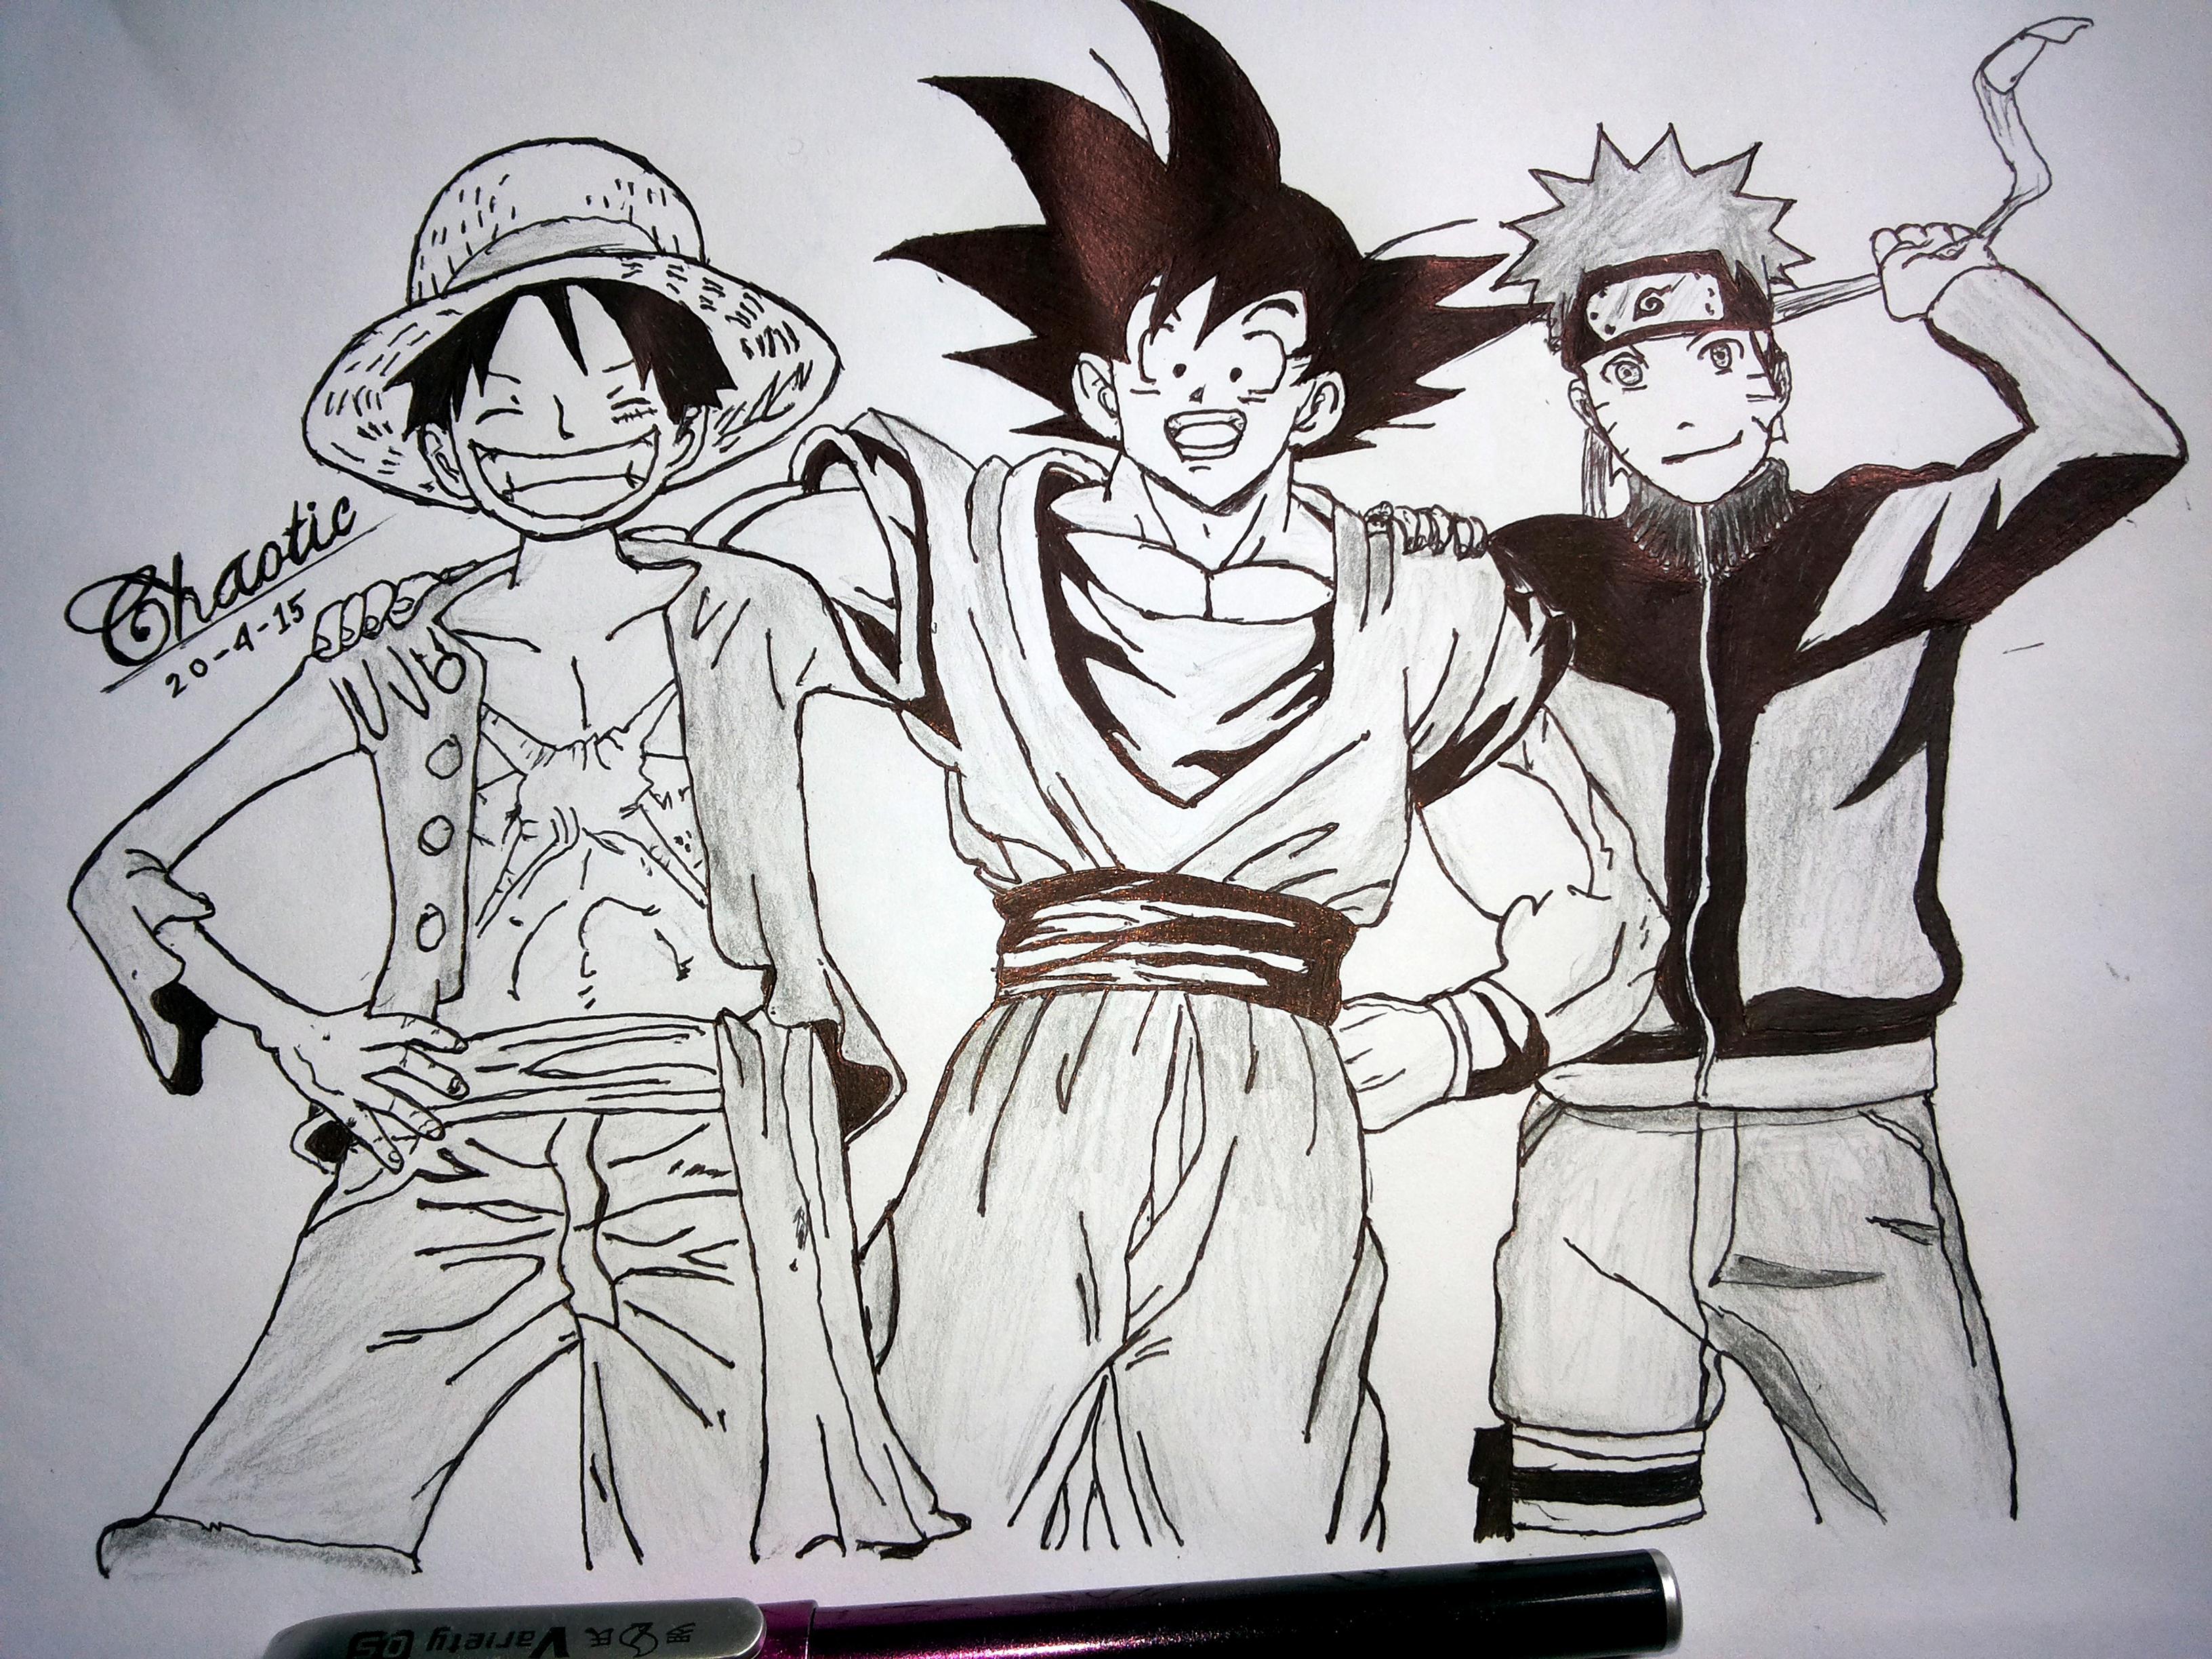 Cool Luffy And Naruto And Goku This Rubber Man Can Stretch His Body